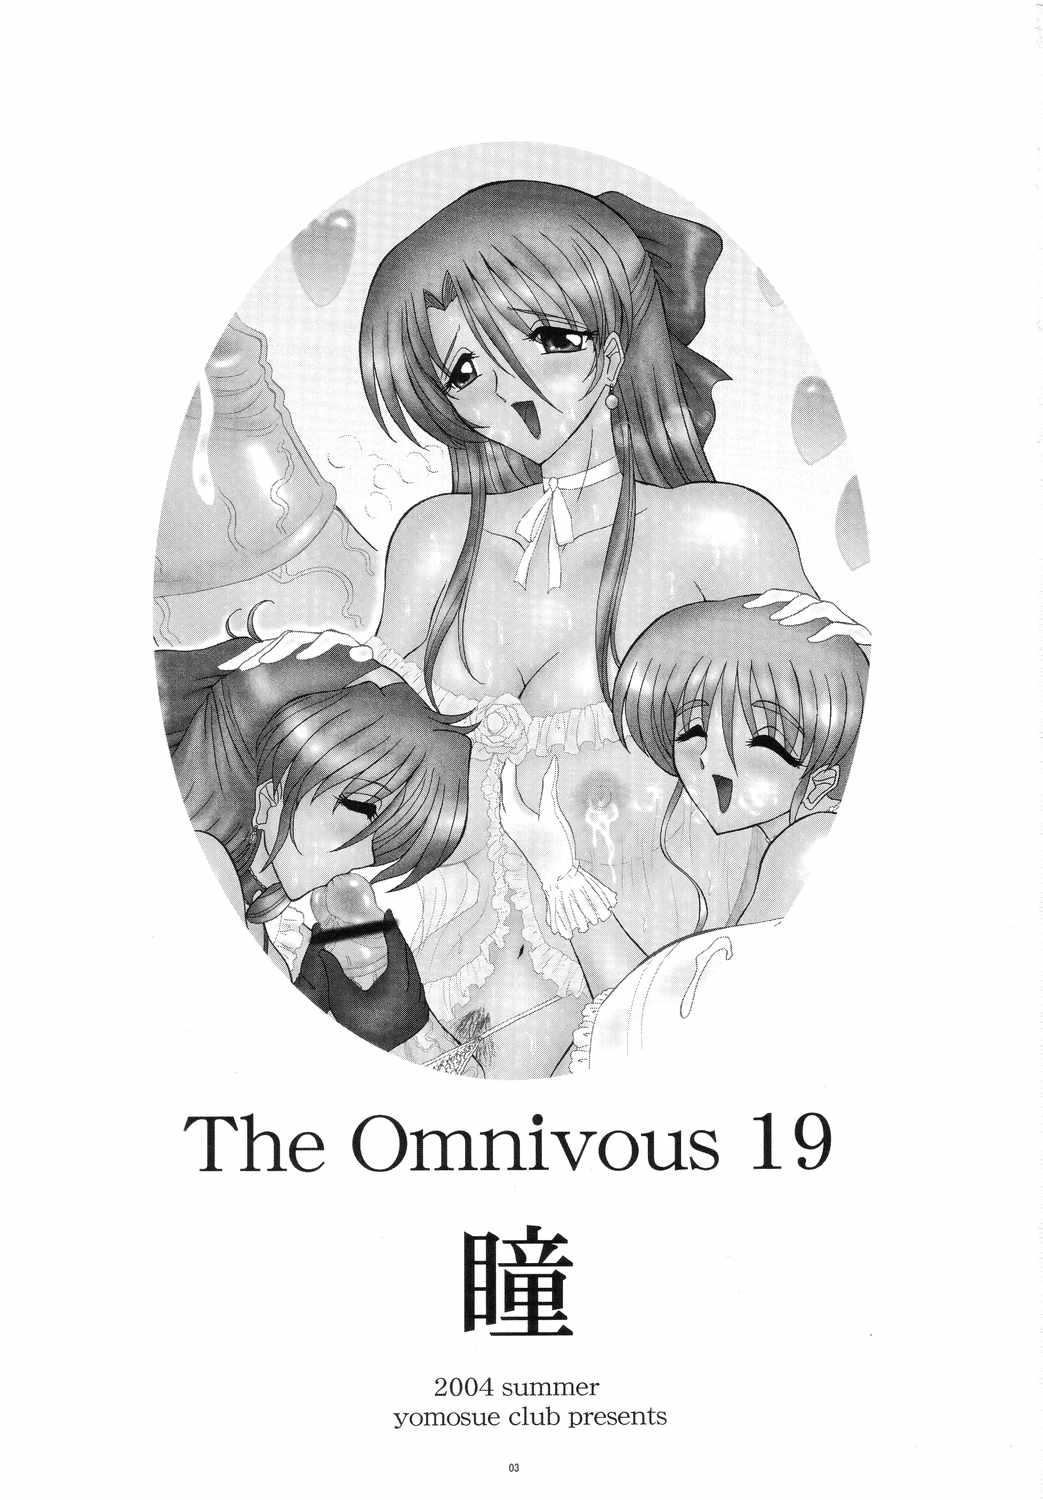 THE OMNIVOUS 19 Hitomi 1